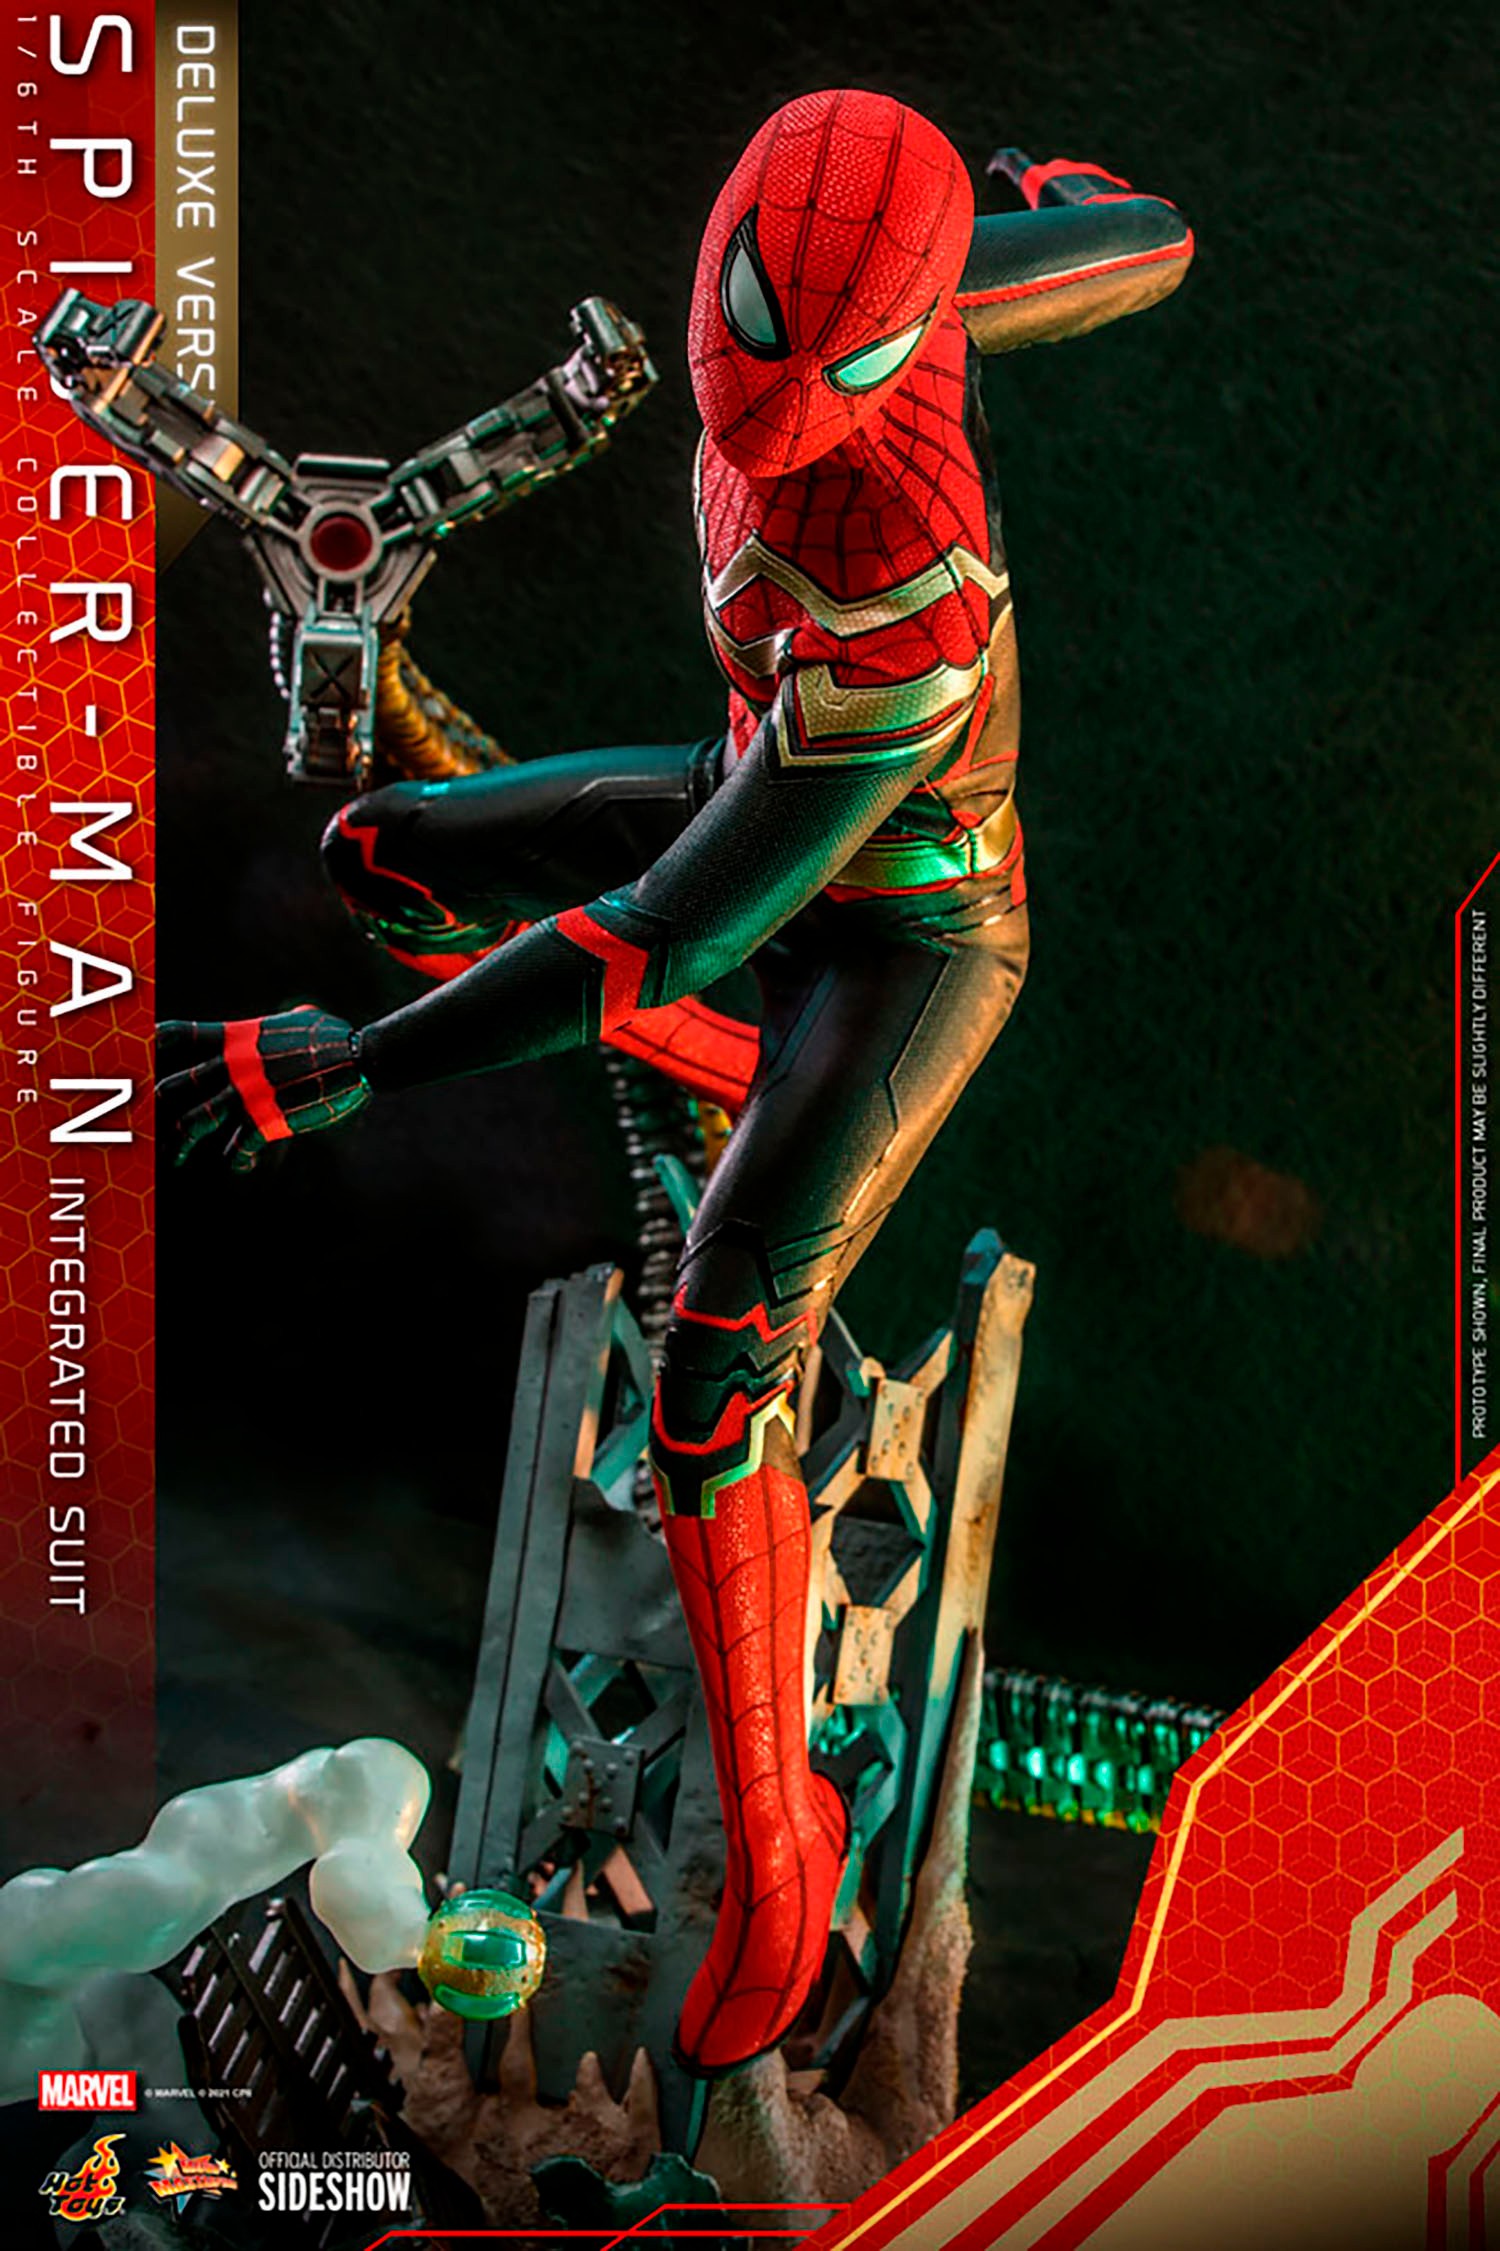 Spider-Man (Integrated Suit) Deluxe Version